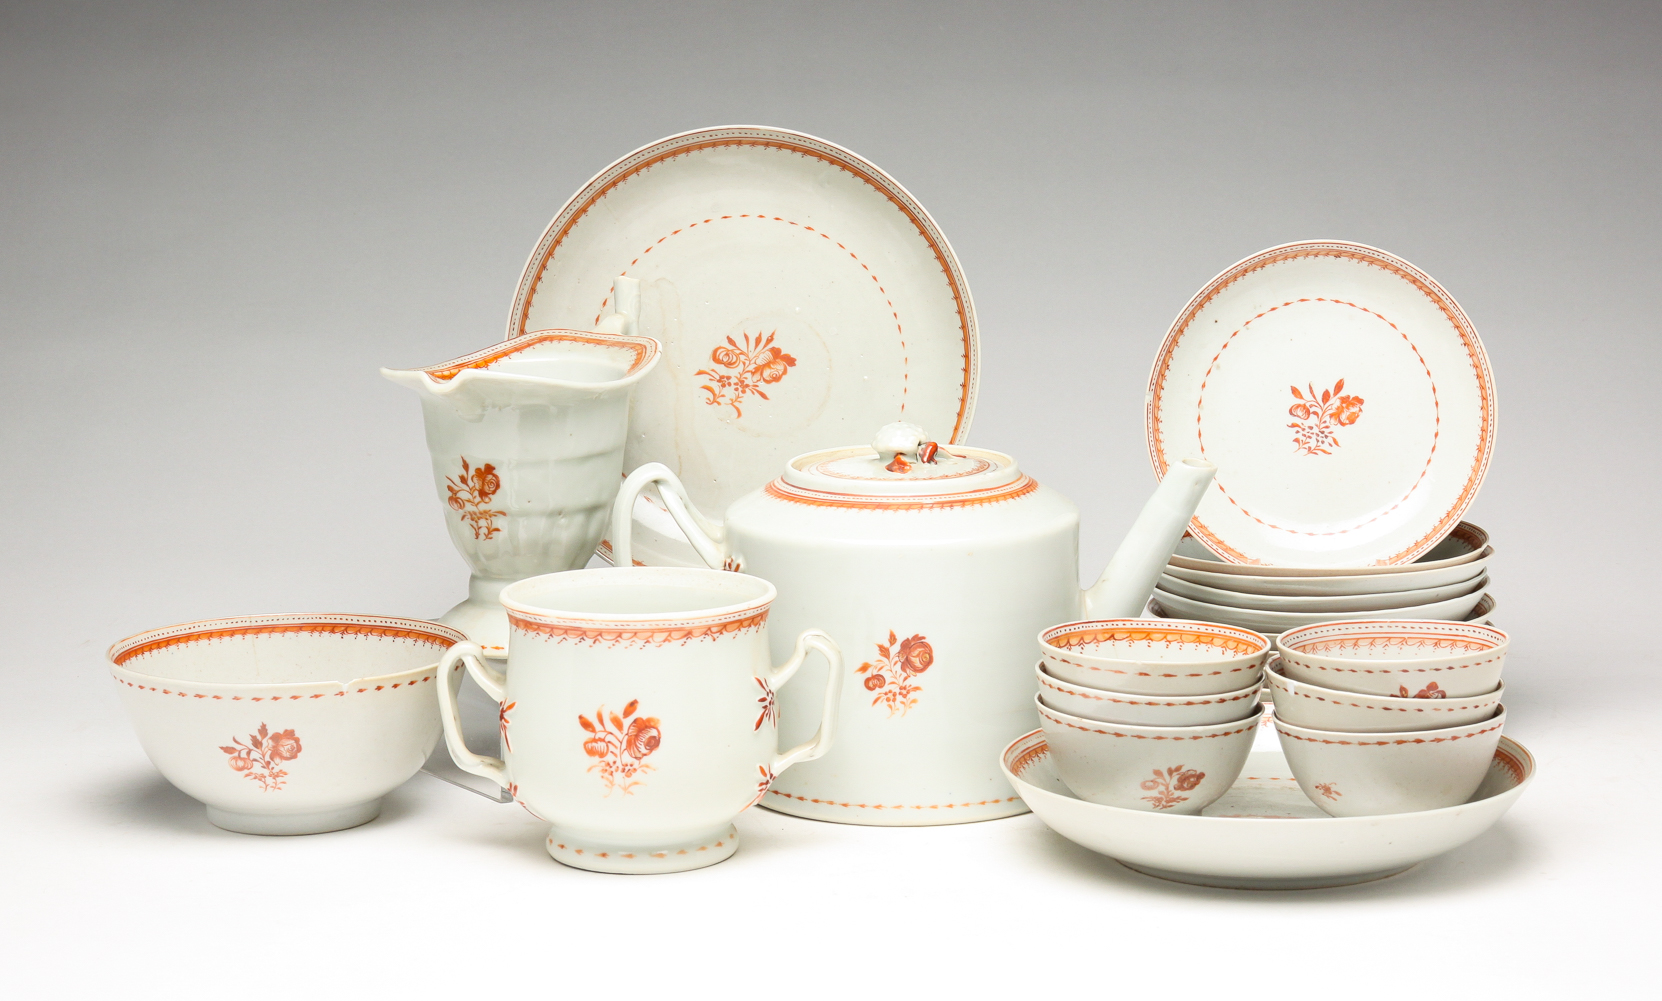 CHINESE EXPORT TEA SET. Early 19th century.